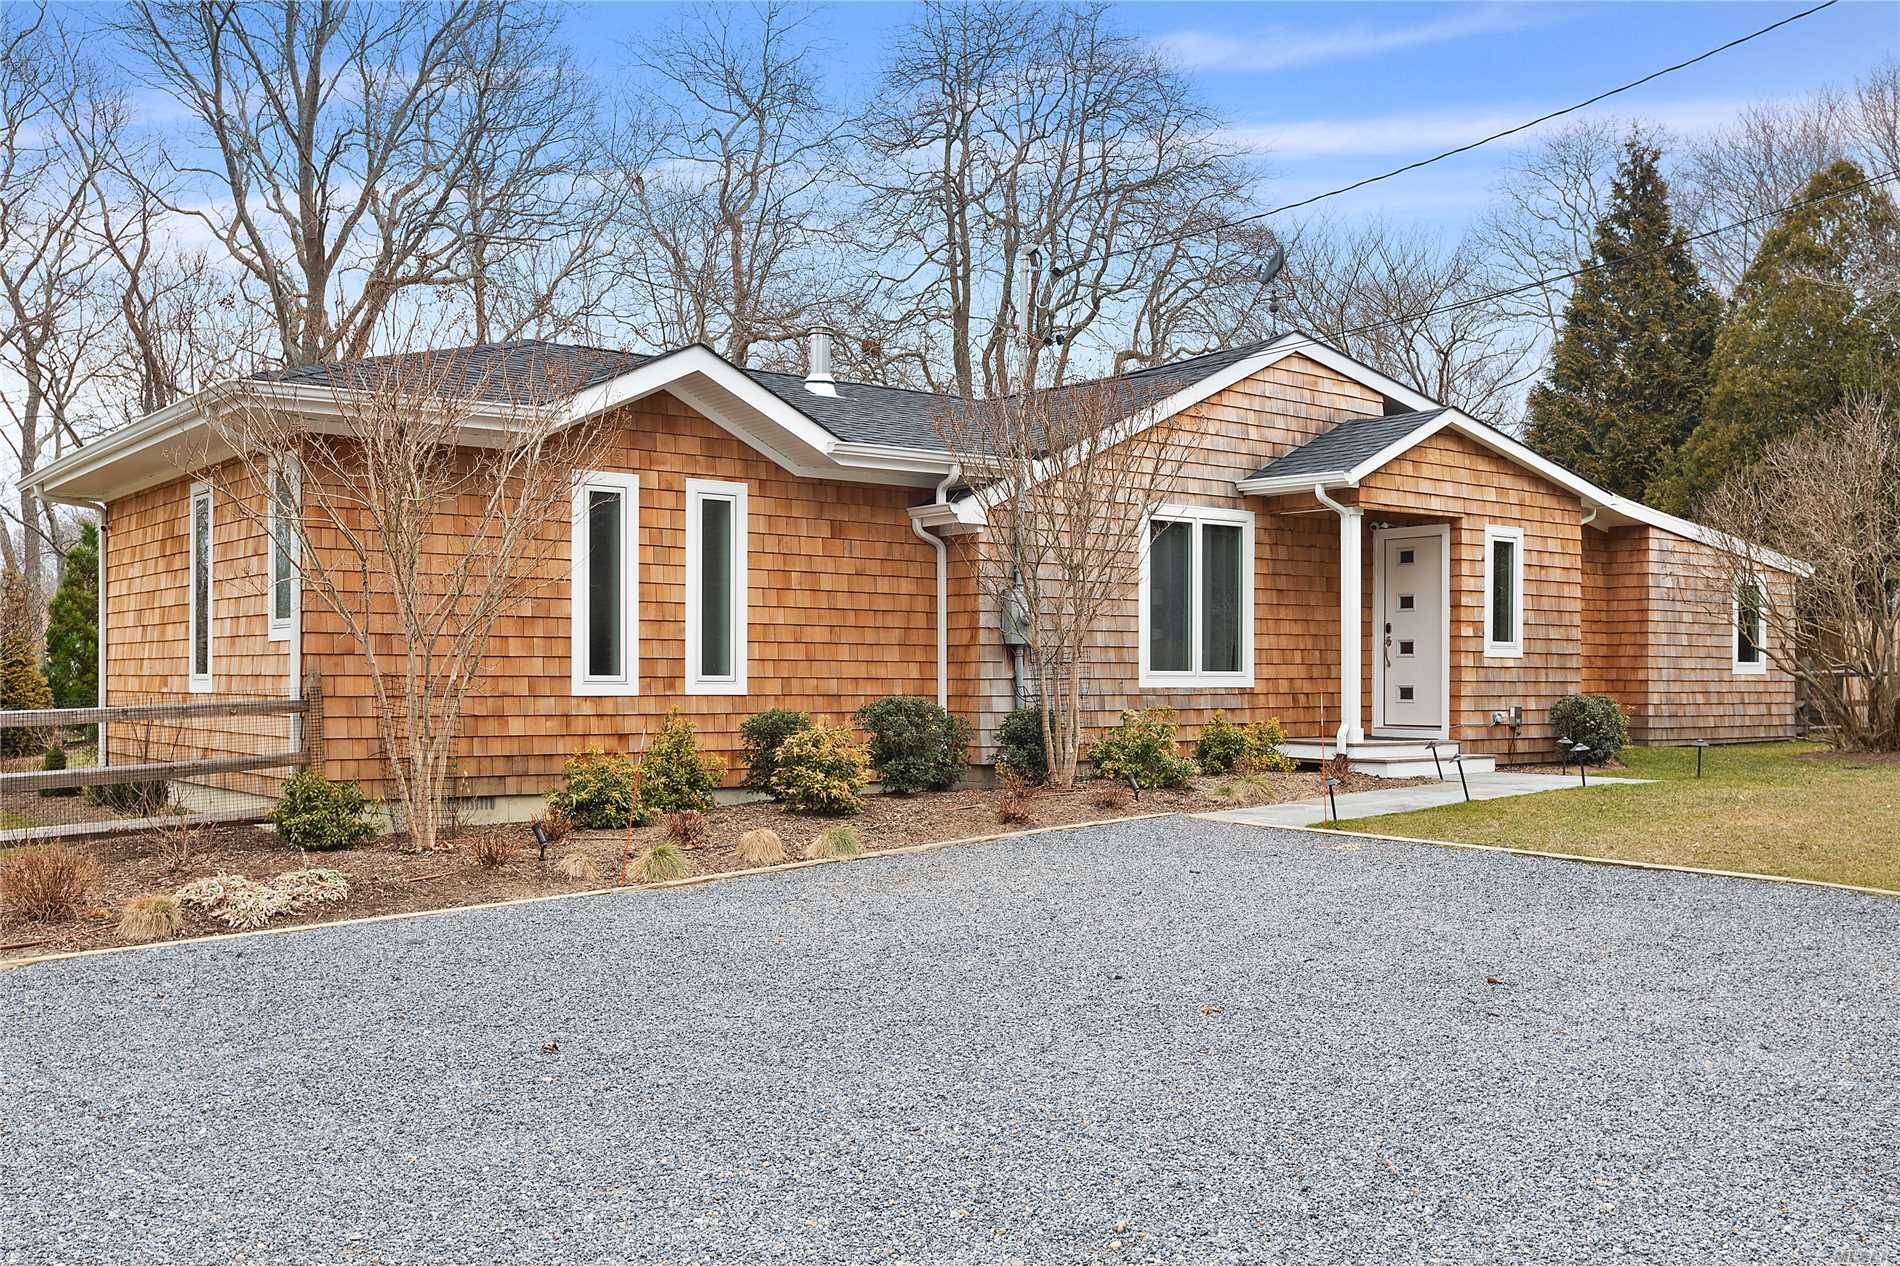 Enjoy the close proximity to East Hampton Village from this completely renovated four bedroom four bathroom modern cottage with finished basement.